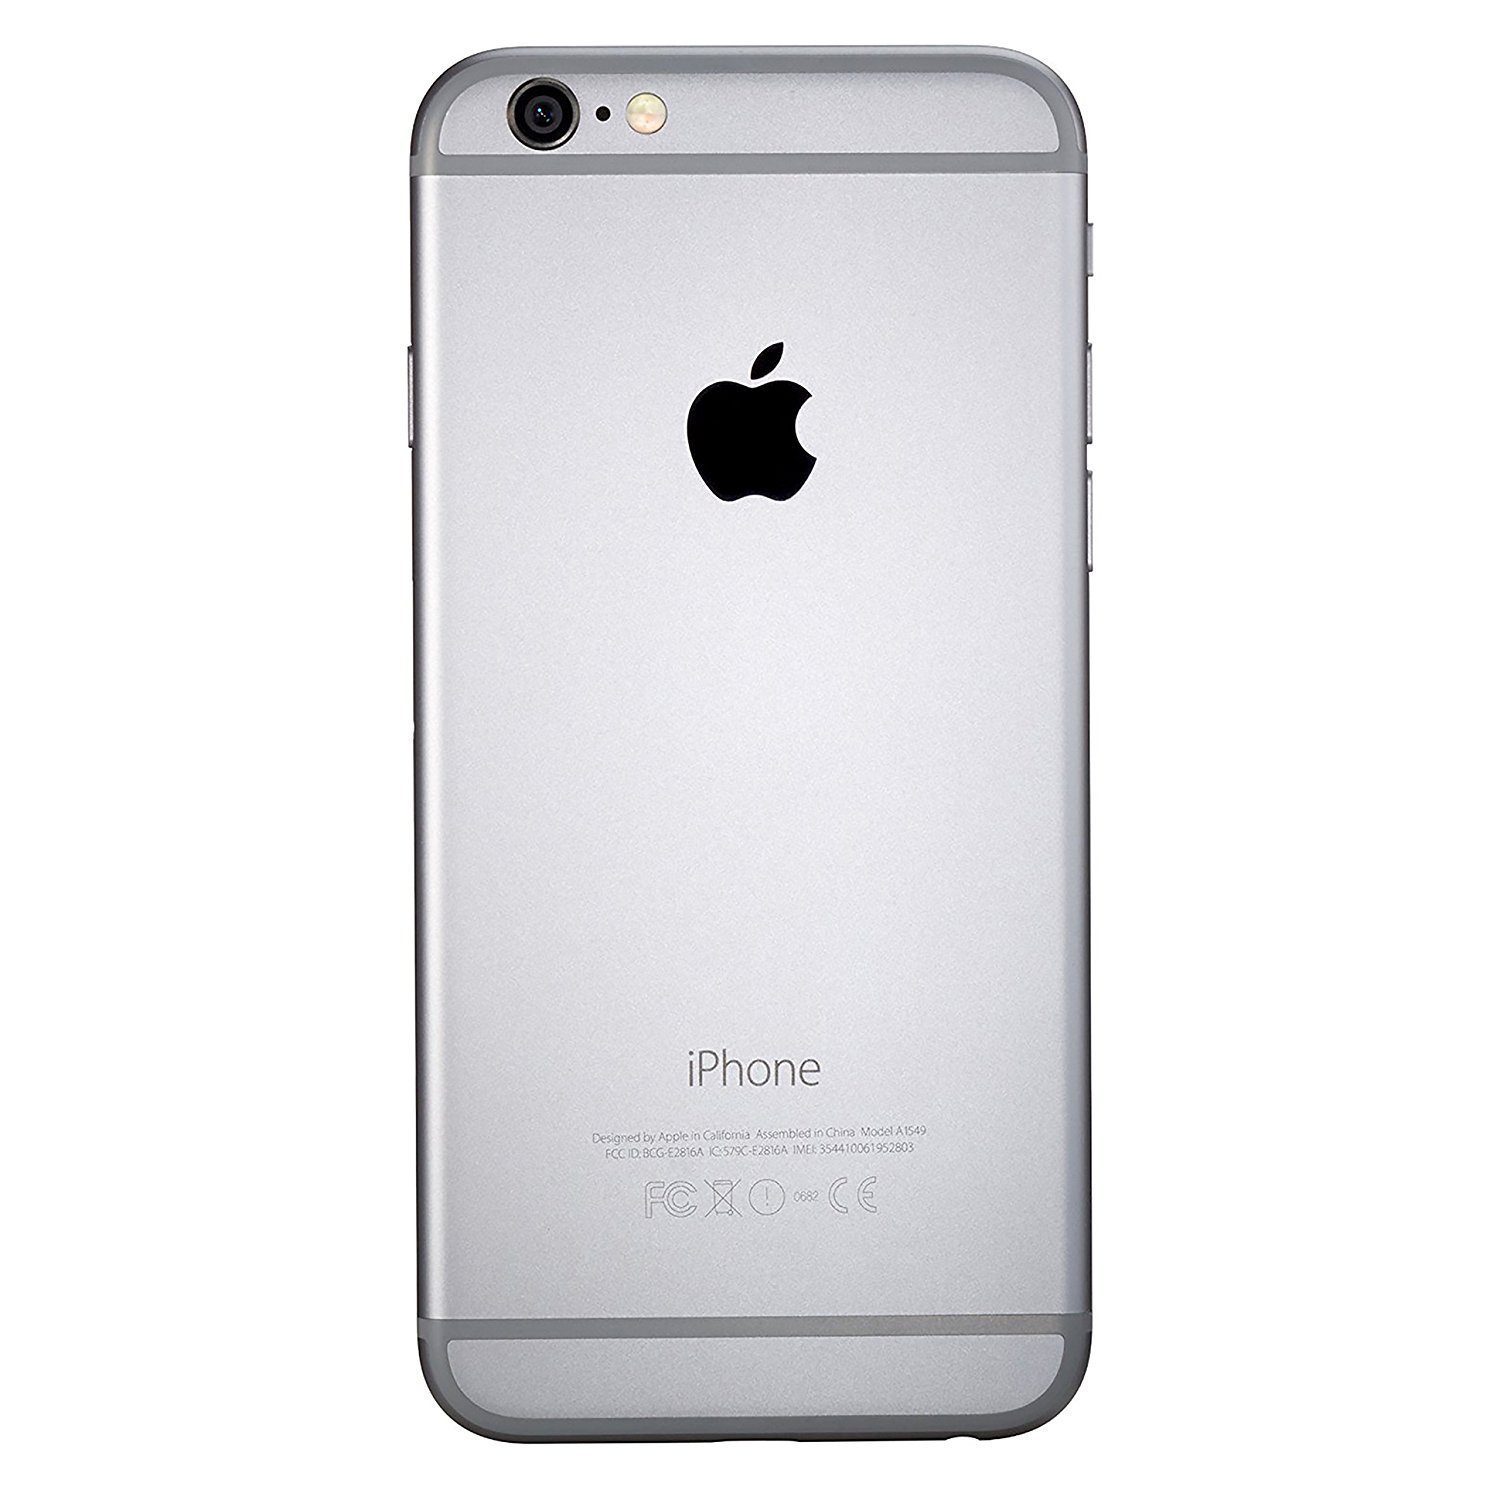 Apple iPhone 6 32 GB LOCKED to Boost Mobile, Space Gray ...